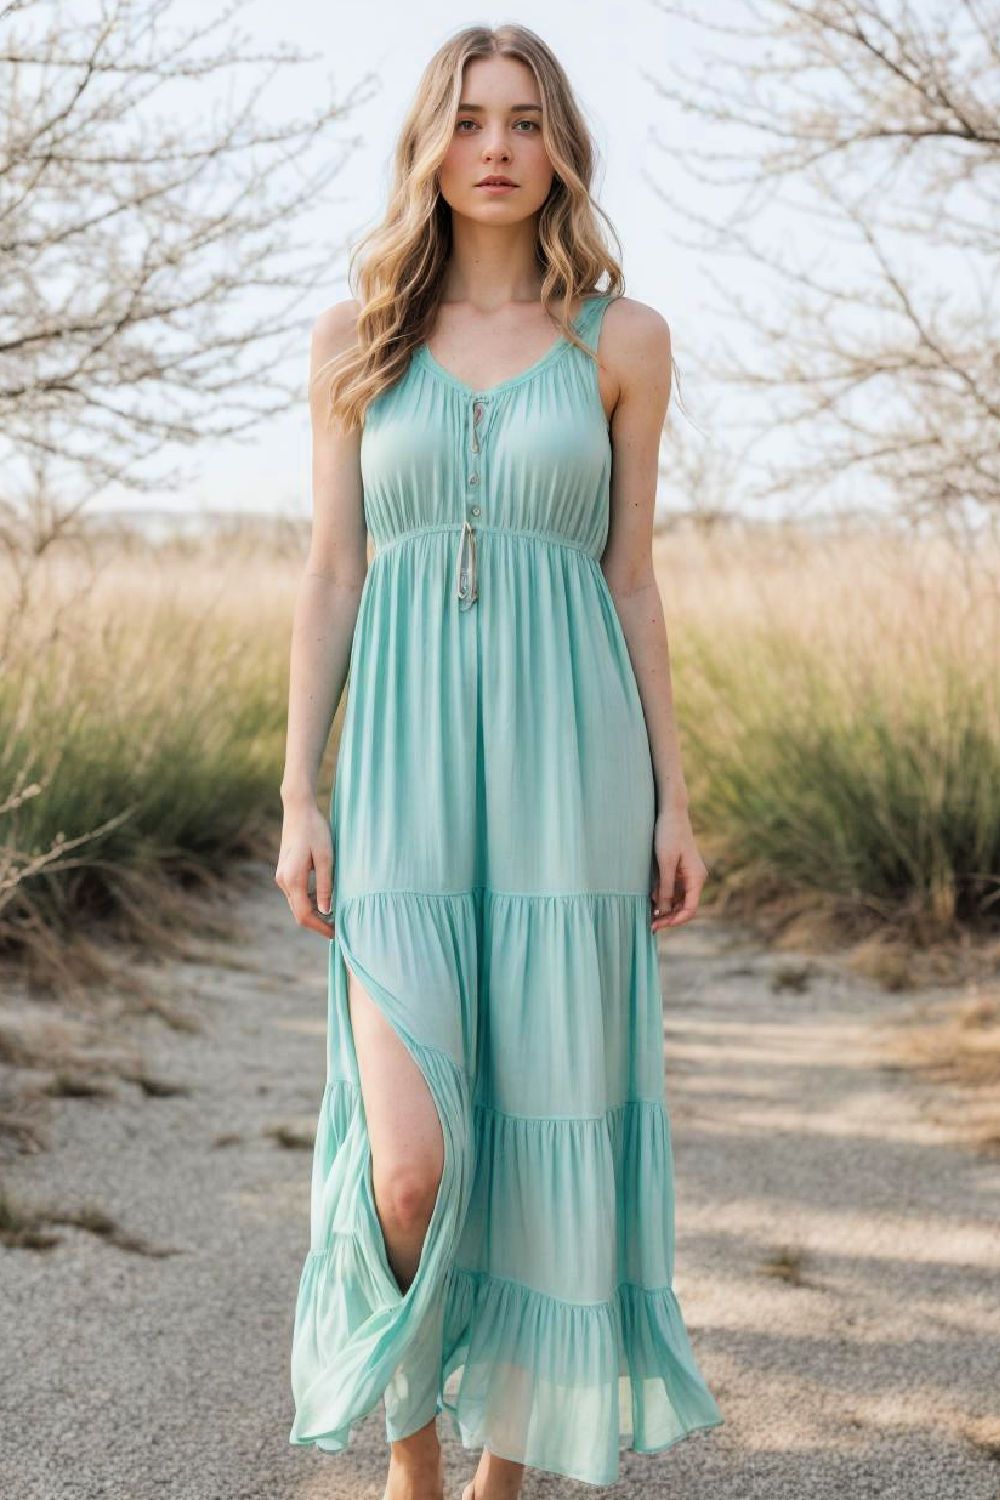 maxi dresses for weekend picnics or evening dinner dates